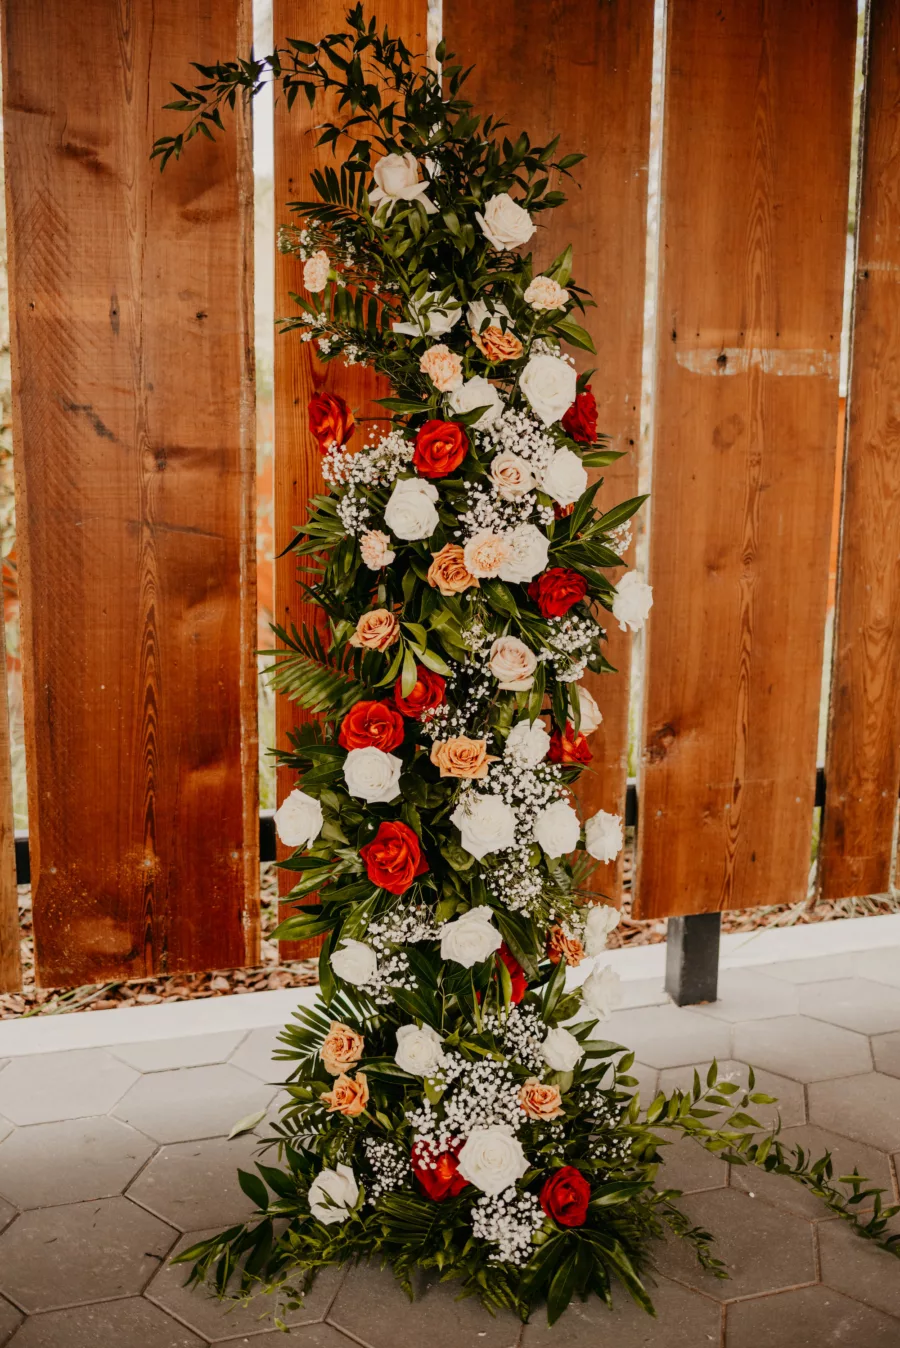 Outdoor Industrial Wedding Ceremony Inspiration | Terracotta, Orange, and White Roses, Baby's Breath, and Greenery Backdrop Ideas